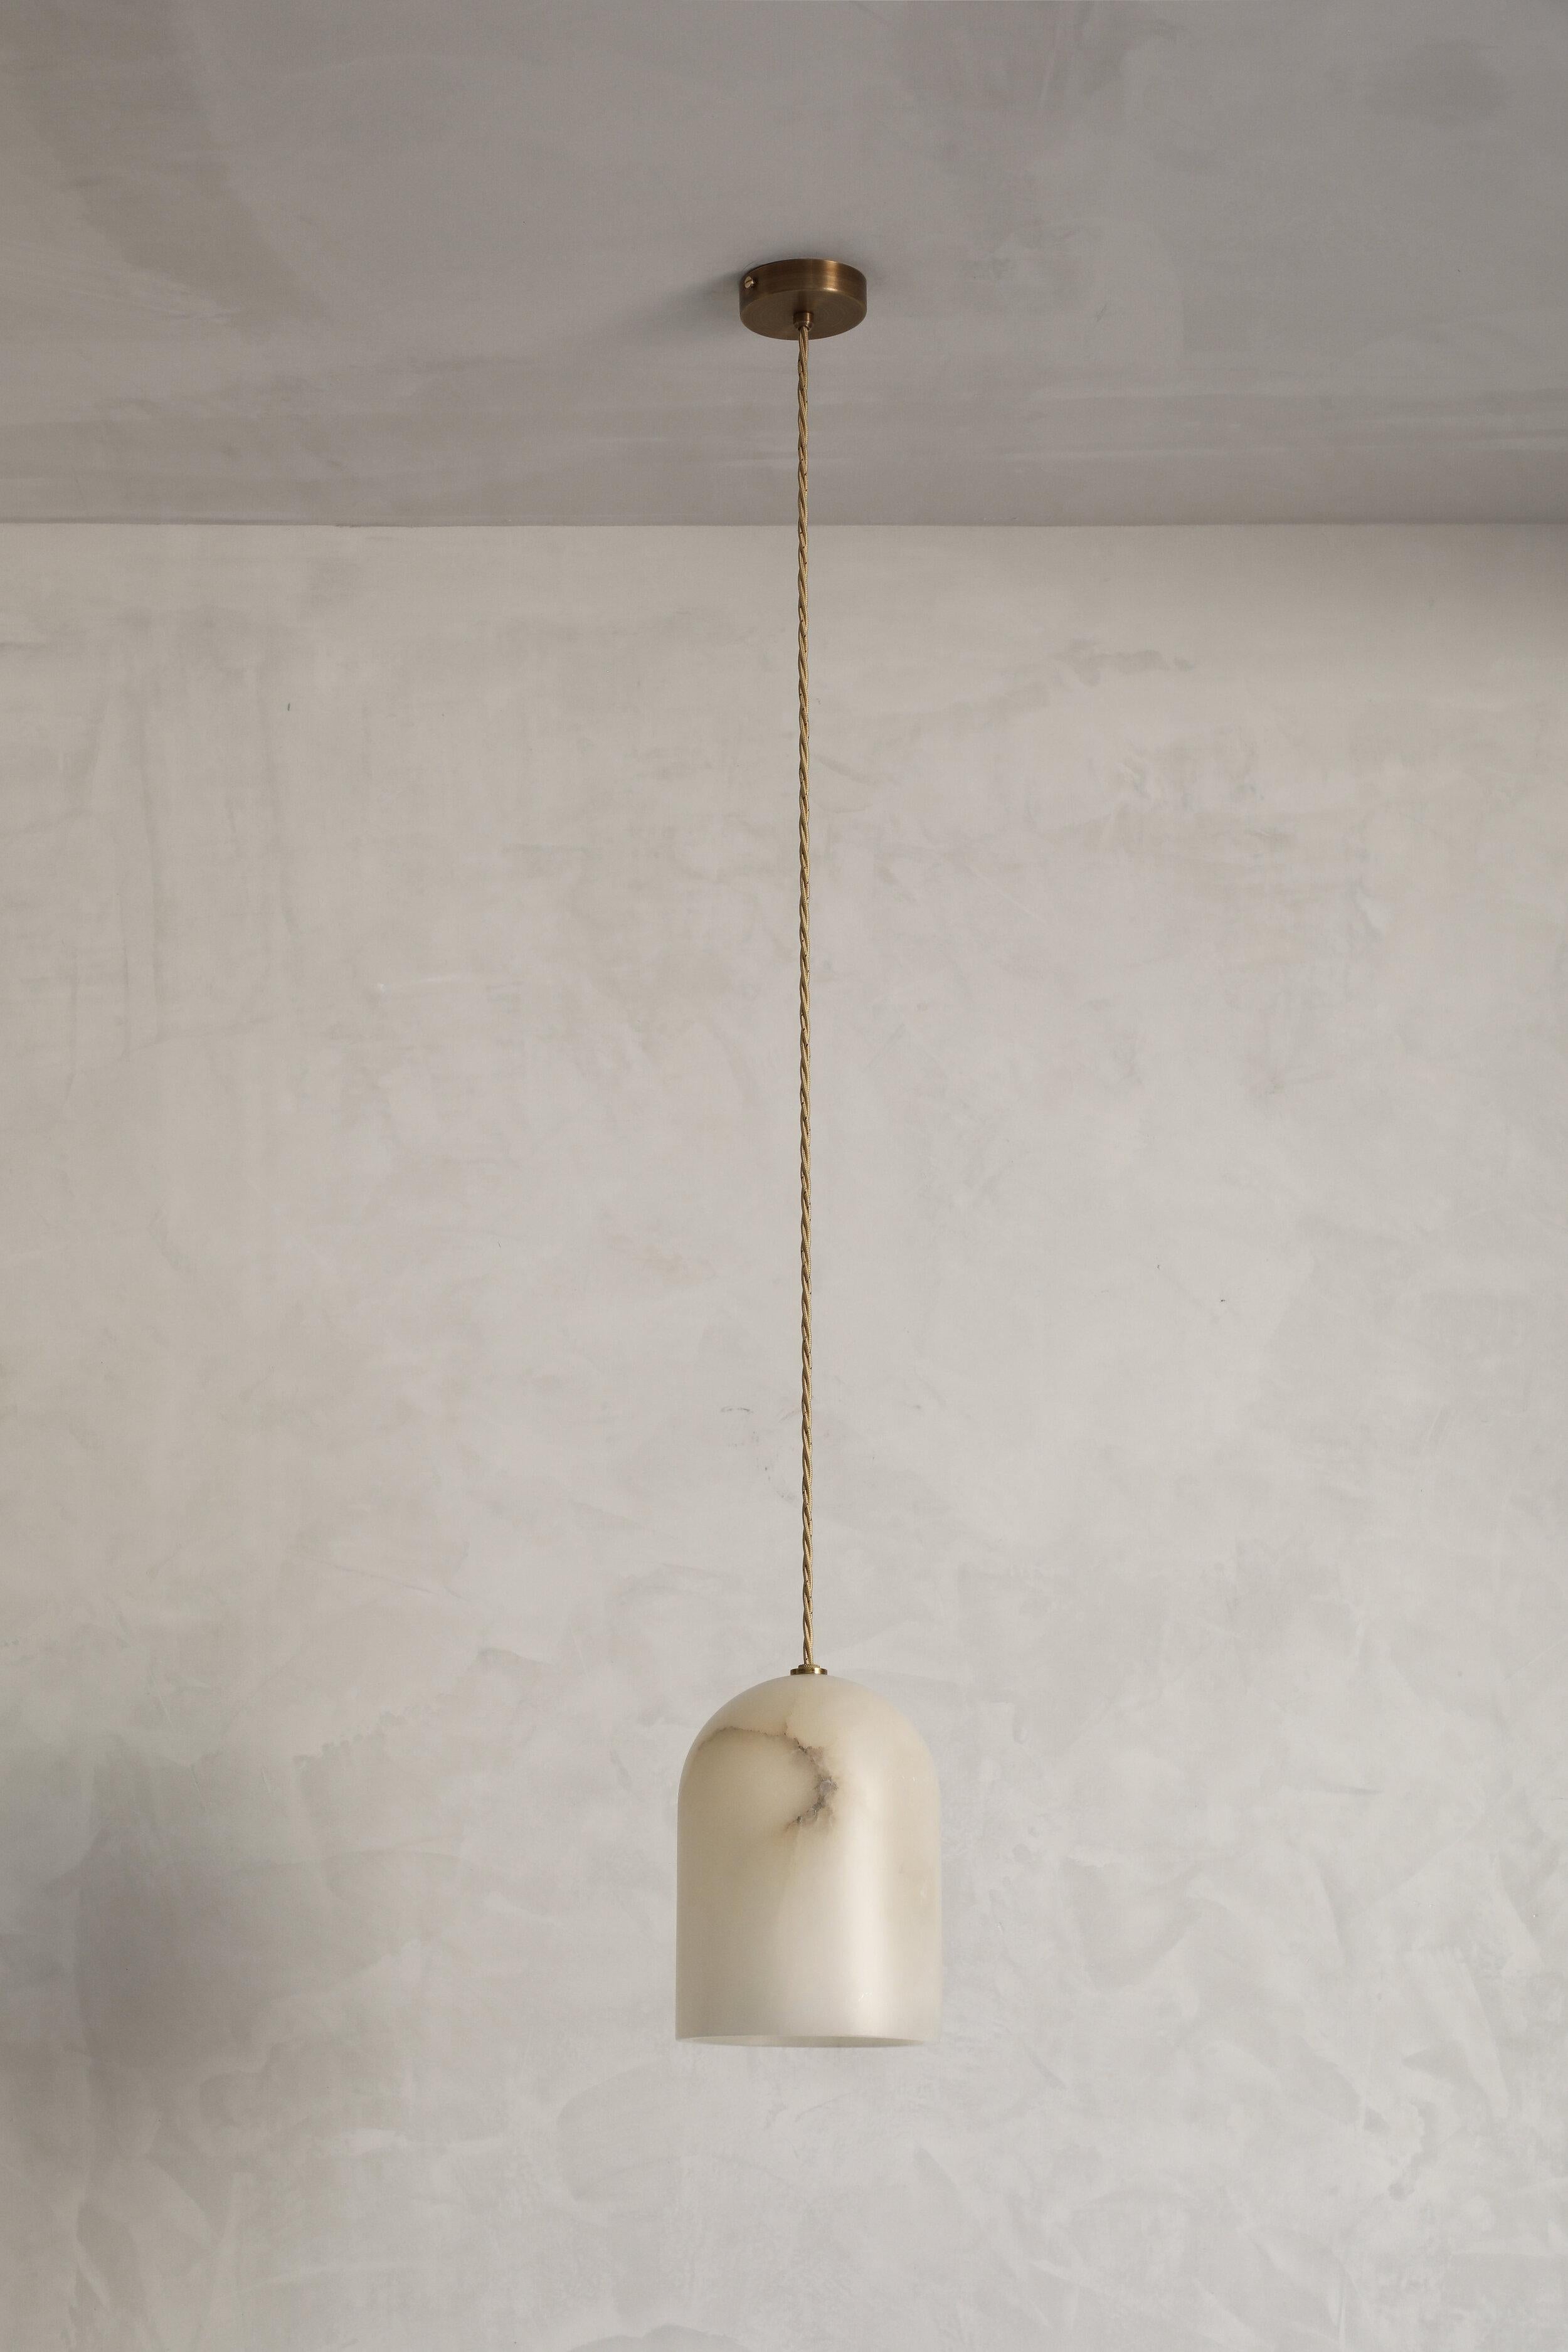 Belfry Alabaster cable pendant by Contain
Dimensions: D 16 x H 22 cm
Materials: Alabaster stone
Also available in different finishes and dimensions. 

All our lamps can be wired according to each country. If sold to the USA it will be wired for